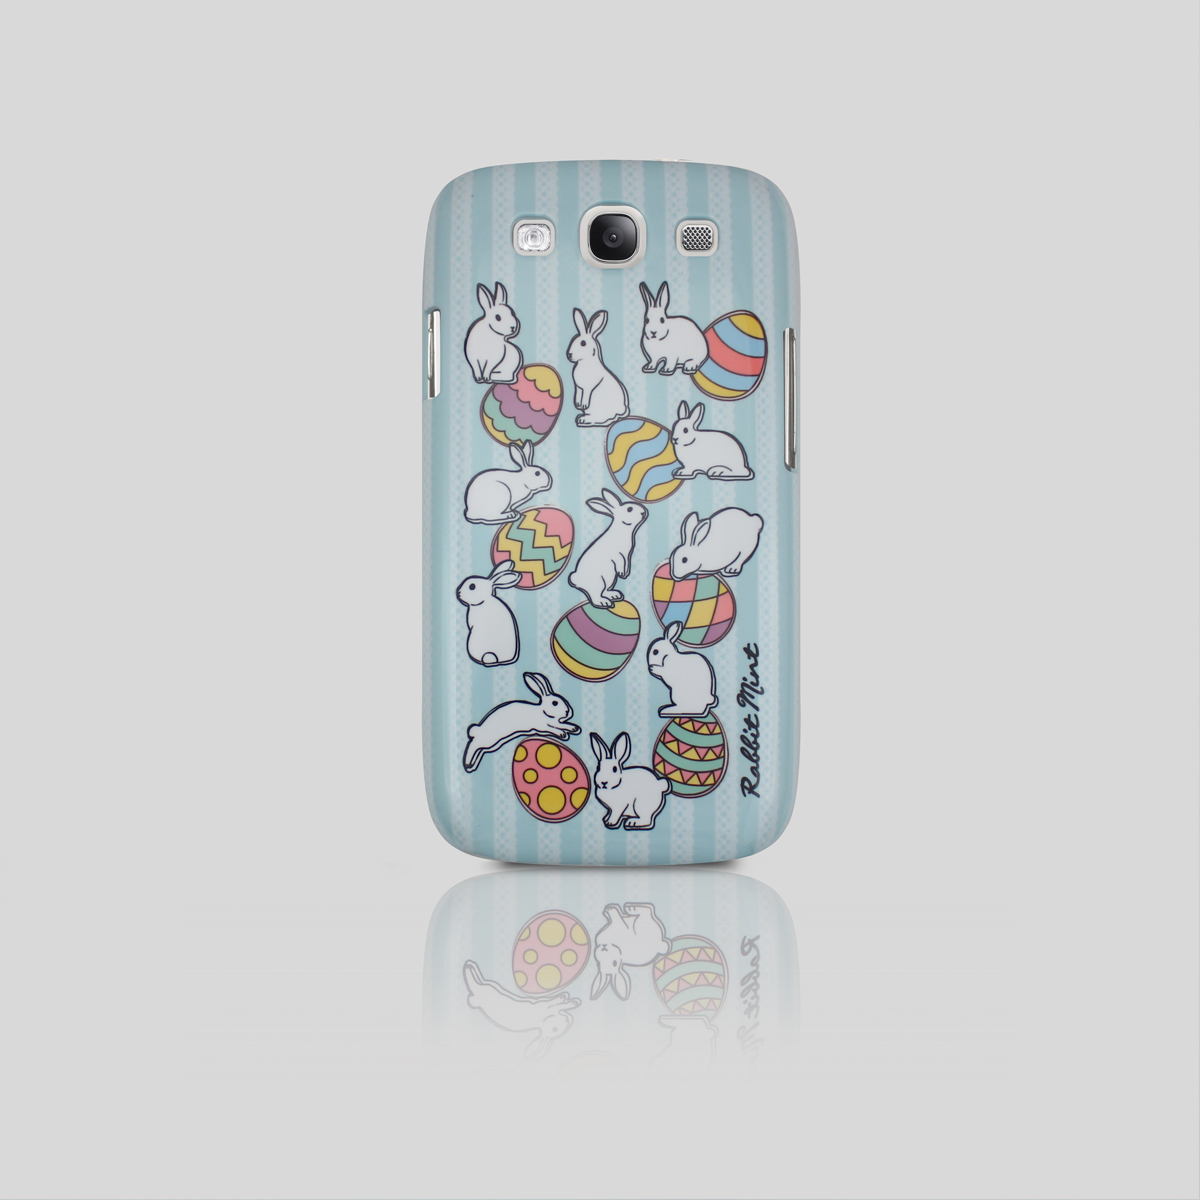 Samsung Galaxy S3 Case - Easter Rabbit - Blue Lace (00063 - S3)